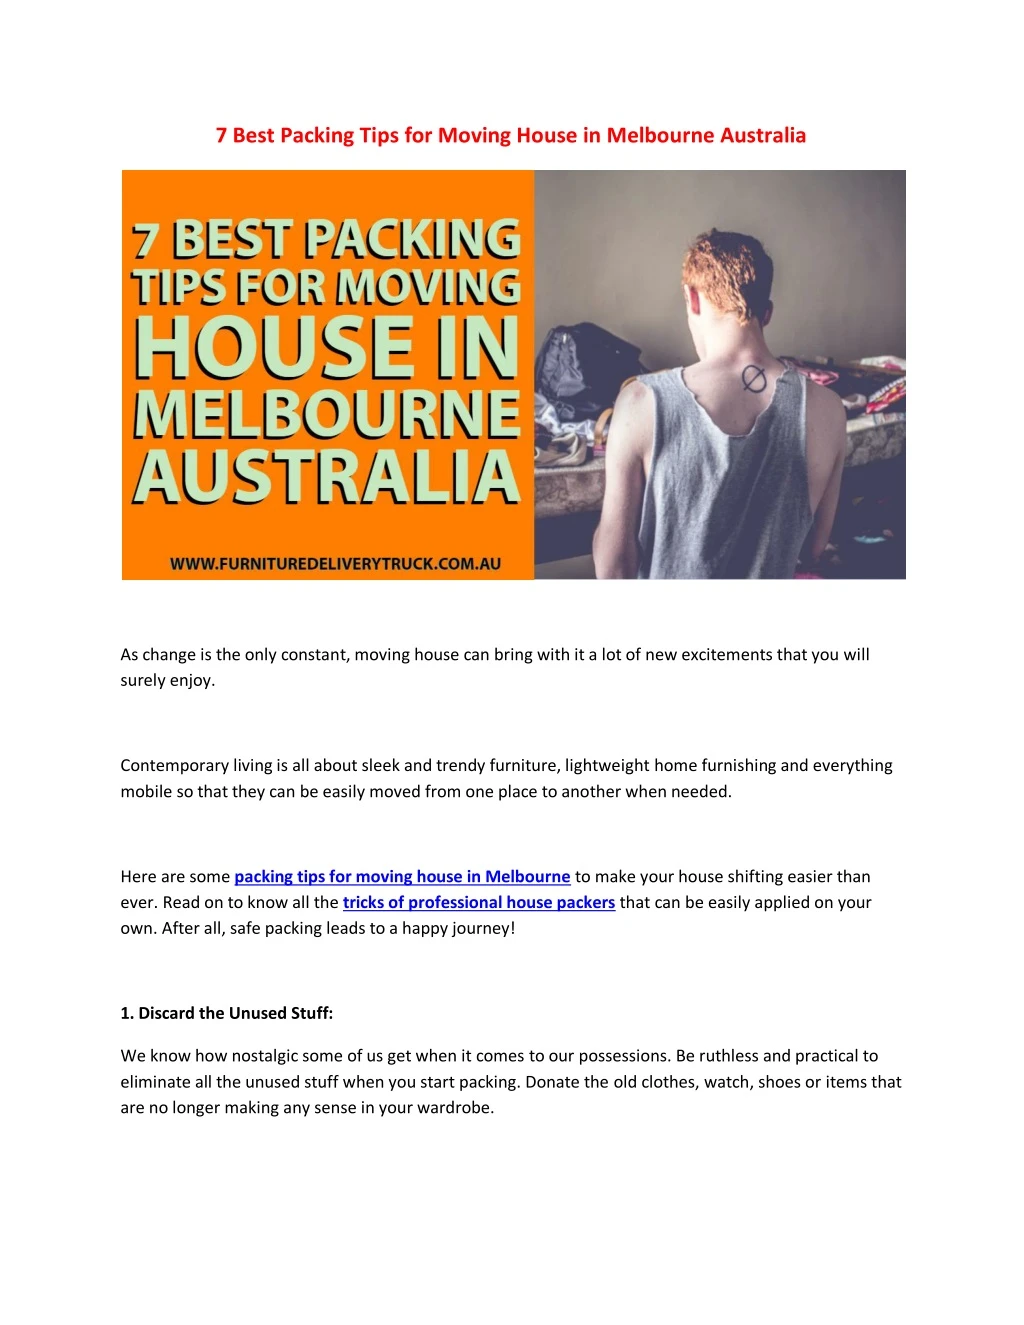 7 best packing tips for moving house in melbourne